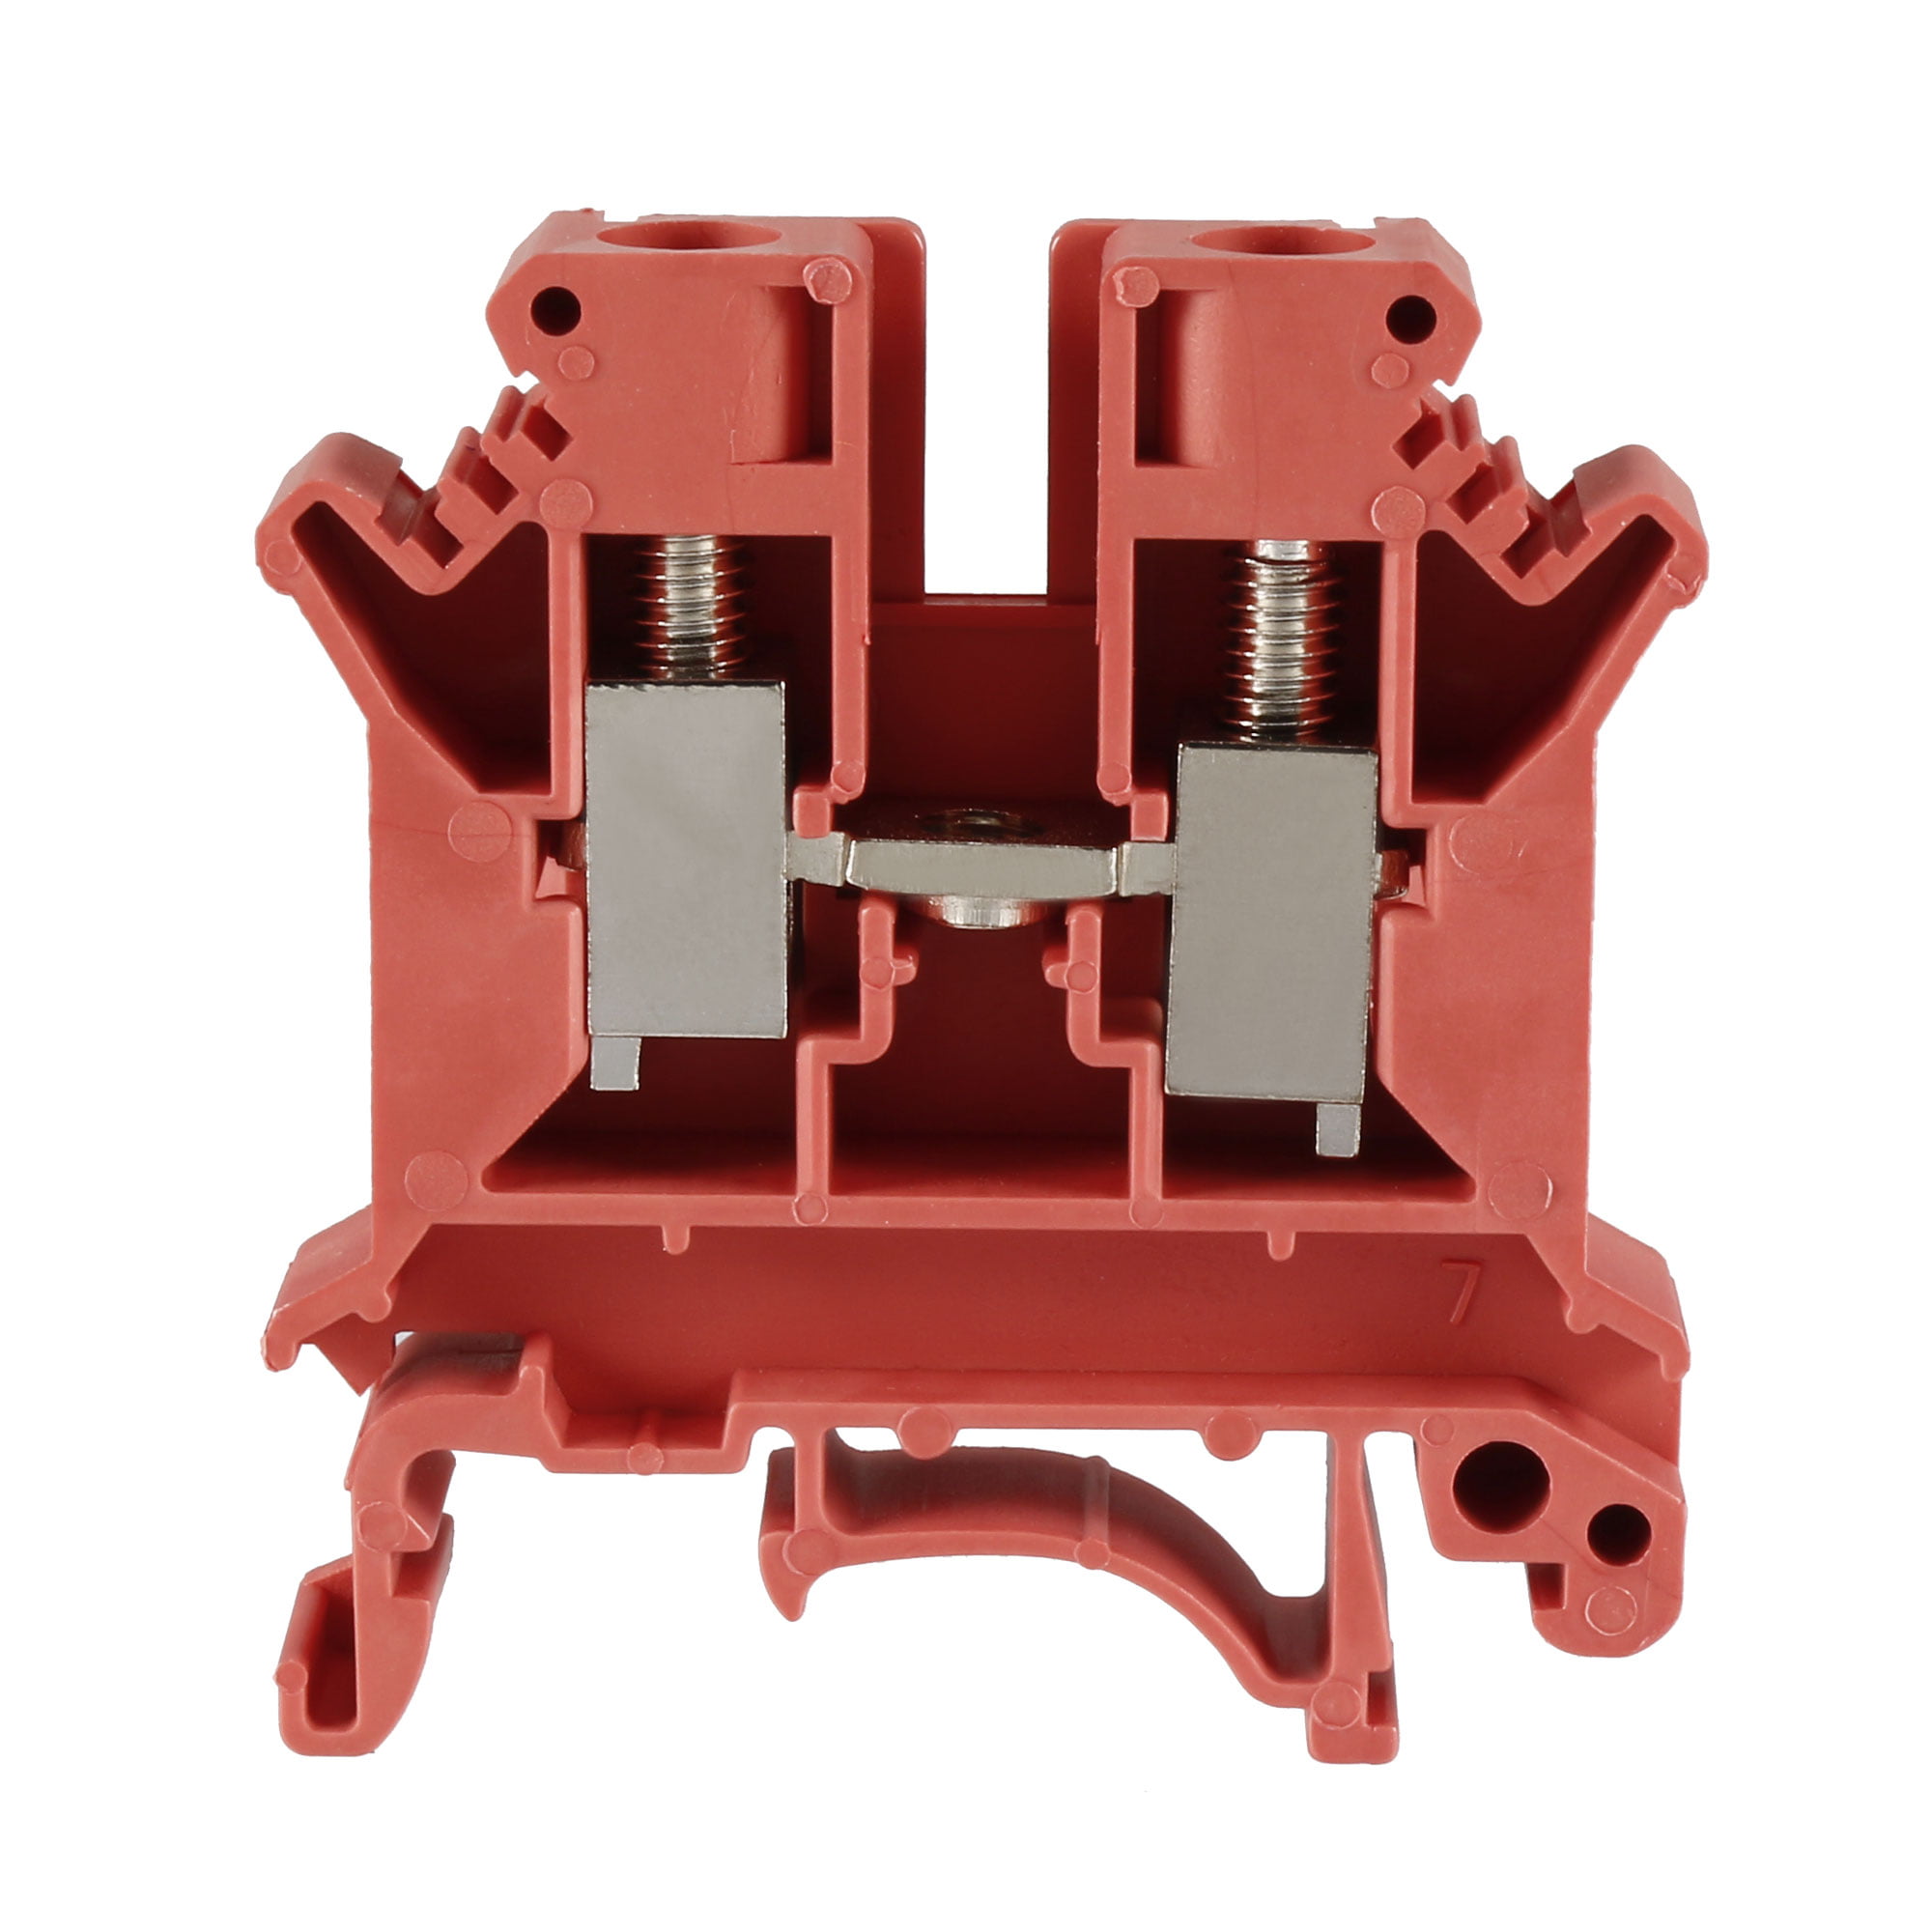 Details about   DIN Rail Terminal Block UK6N 800V 57A Screw Clamp Contact 6mm2 Black 5 Pcs 